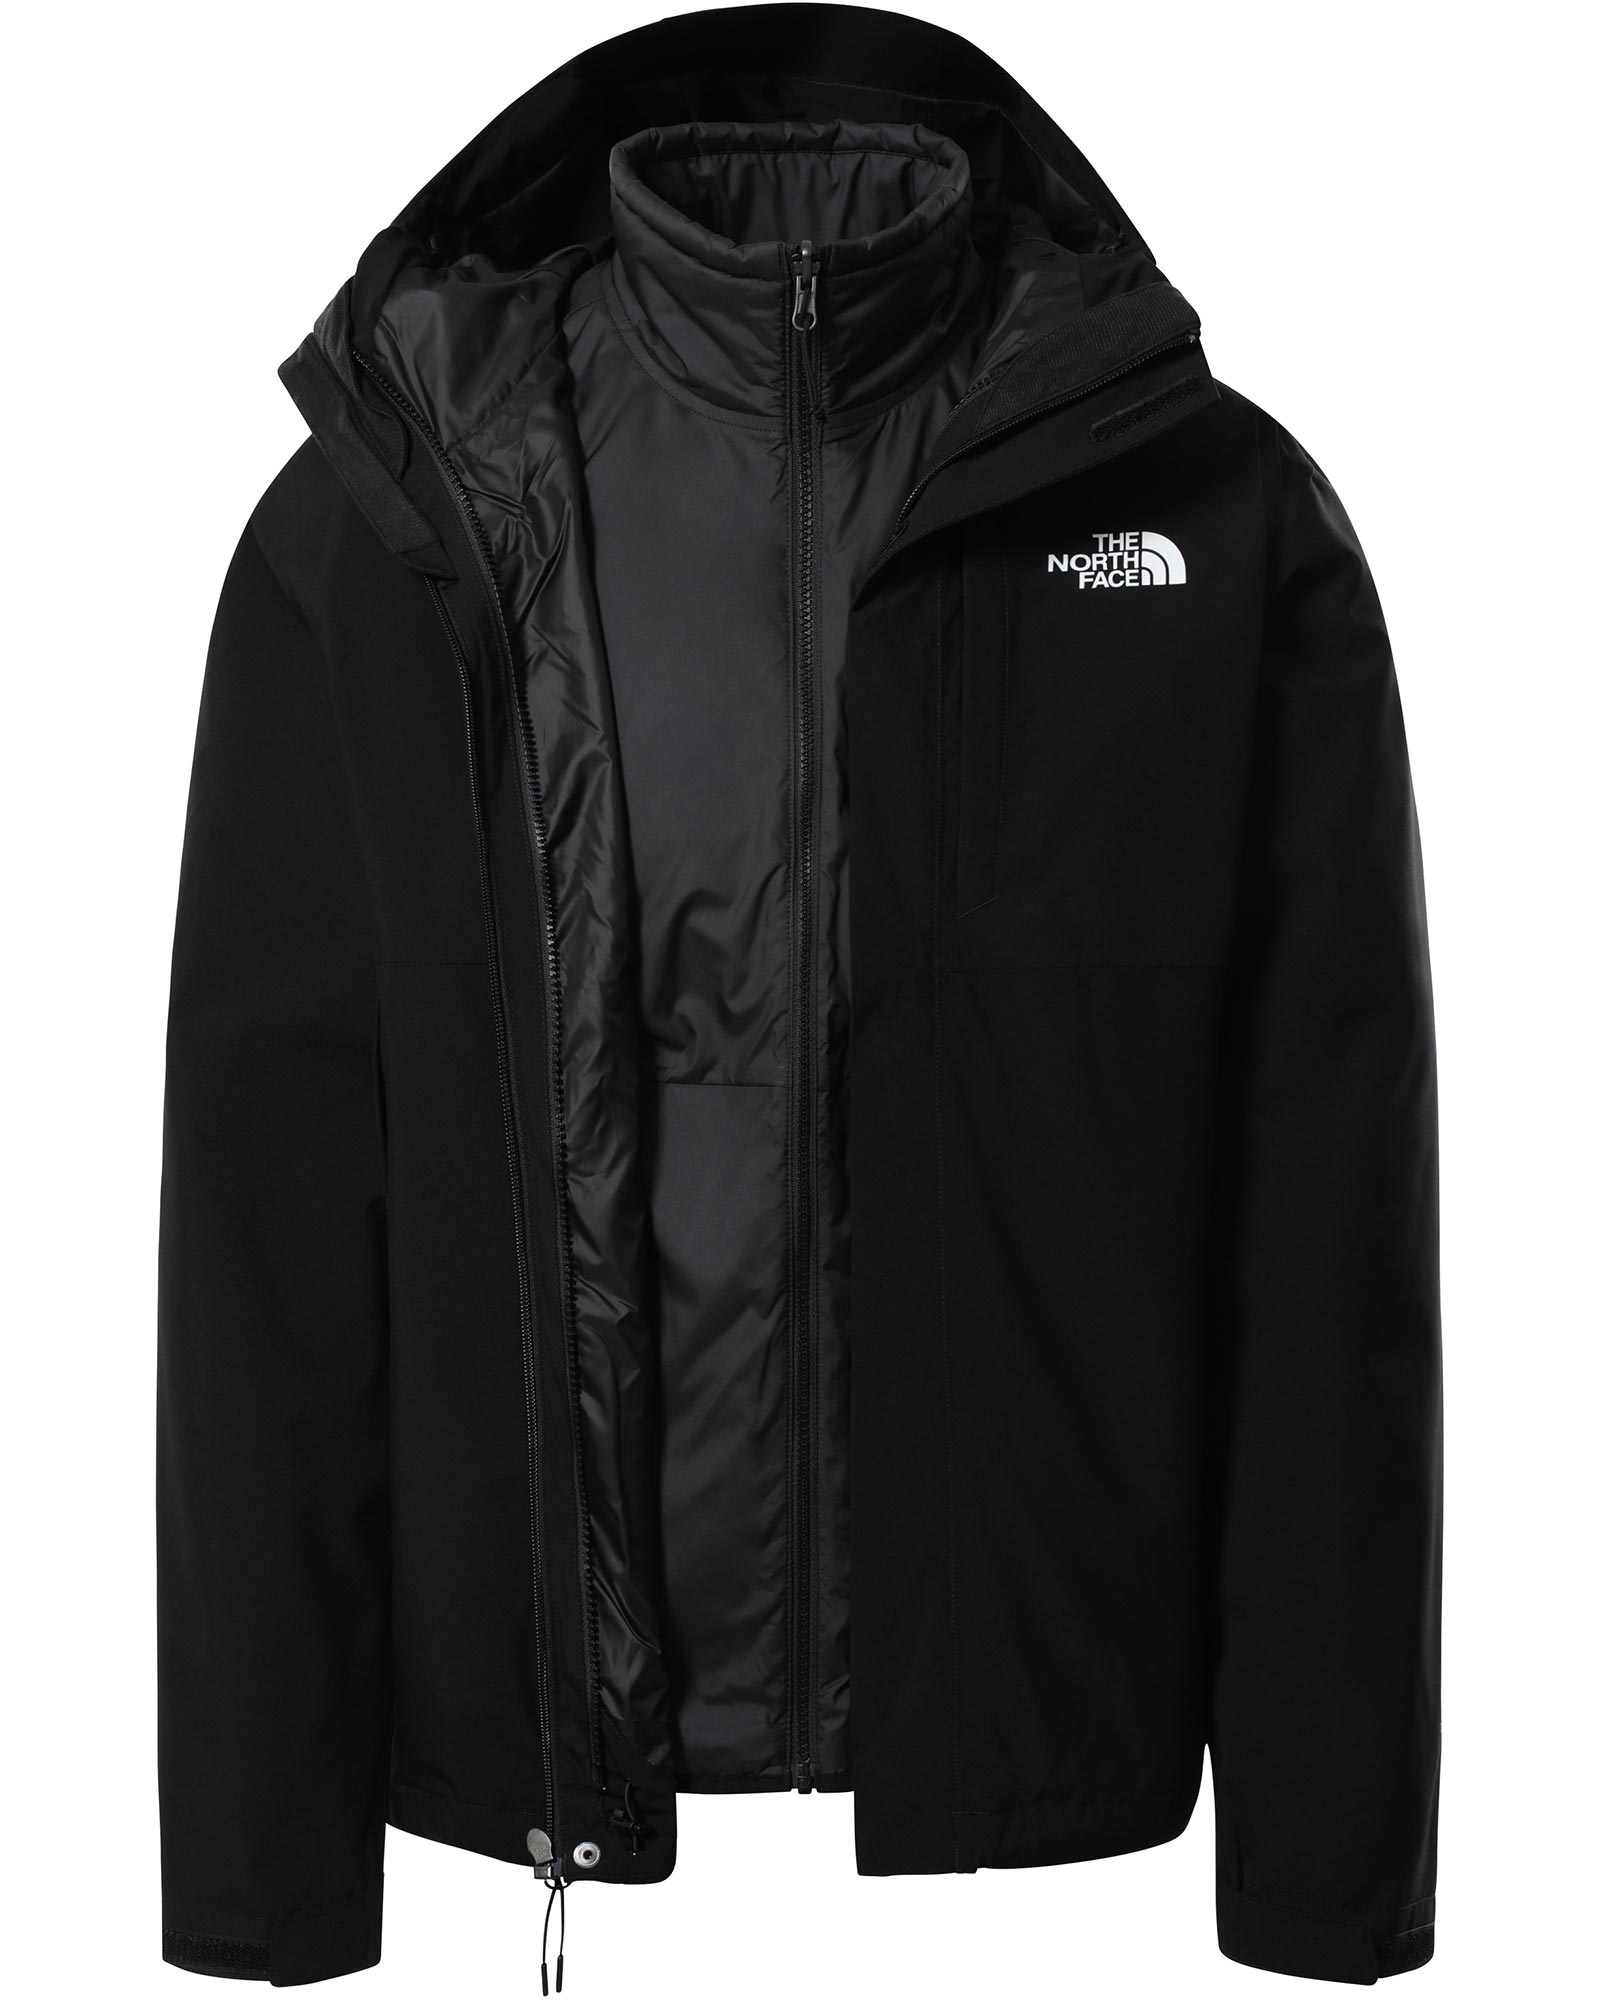 The North Face Carto Men’s Triclimate Jacket - TNF Black S